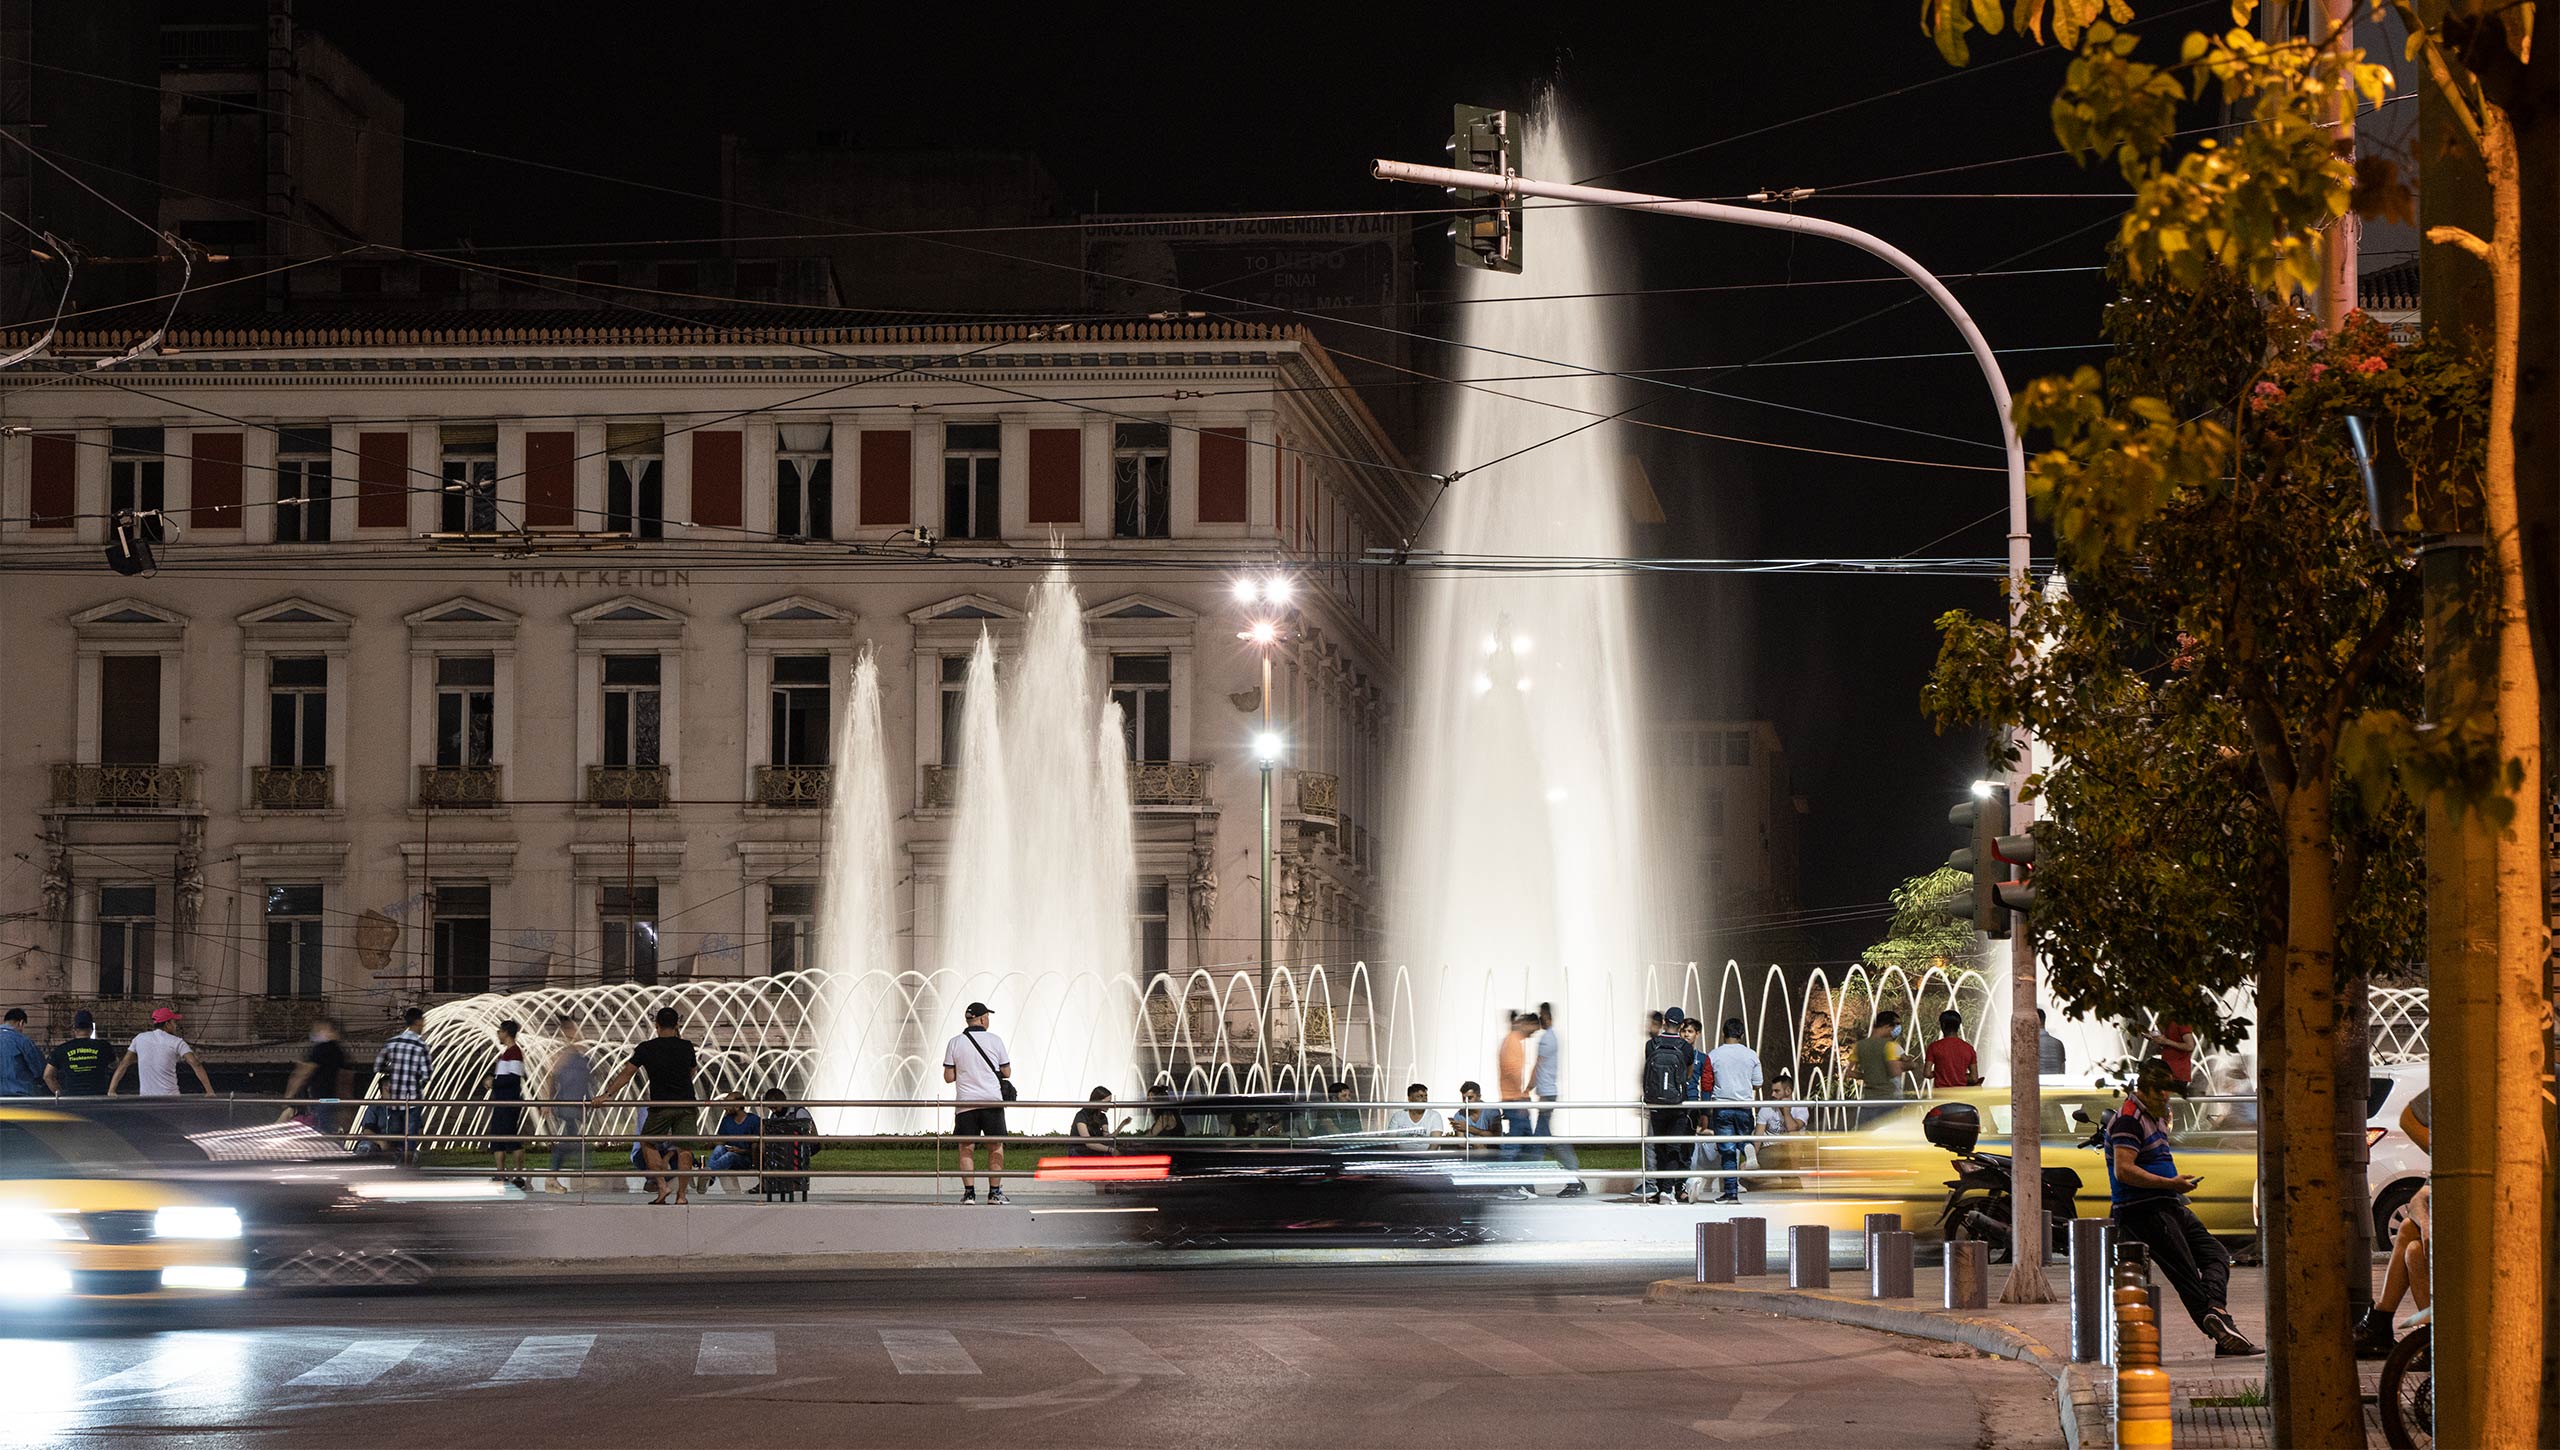 An architectural looking fountain by Fontana fountains in a municipality square.